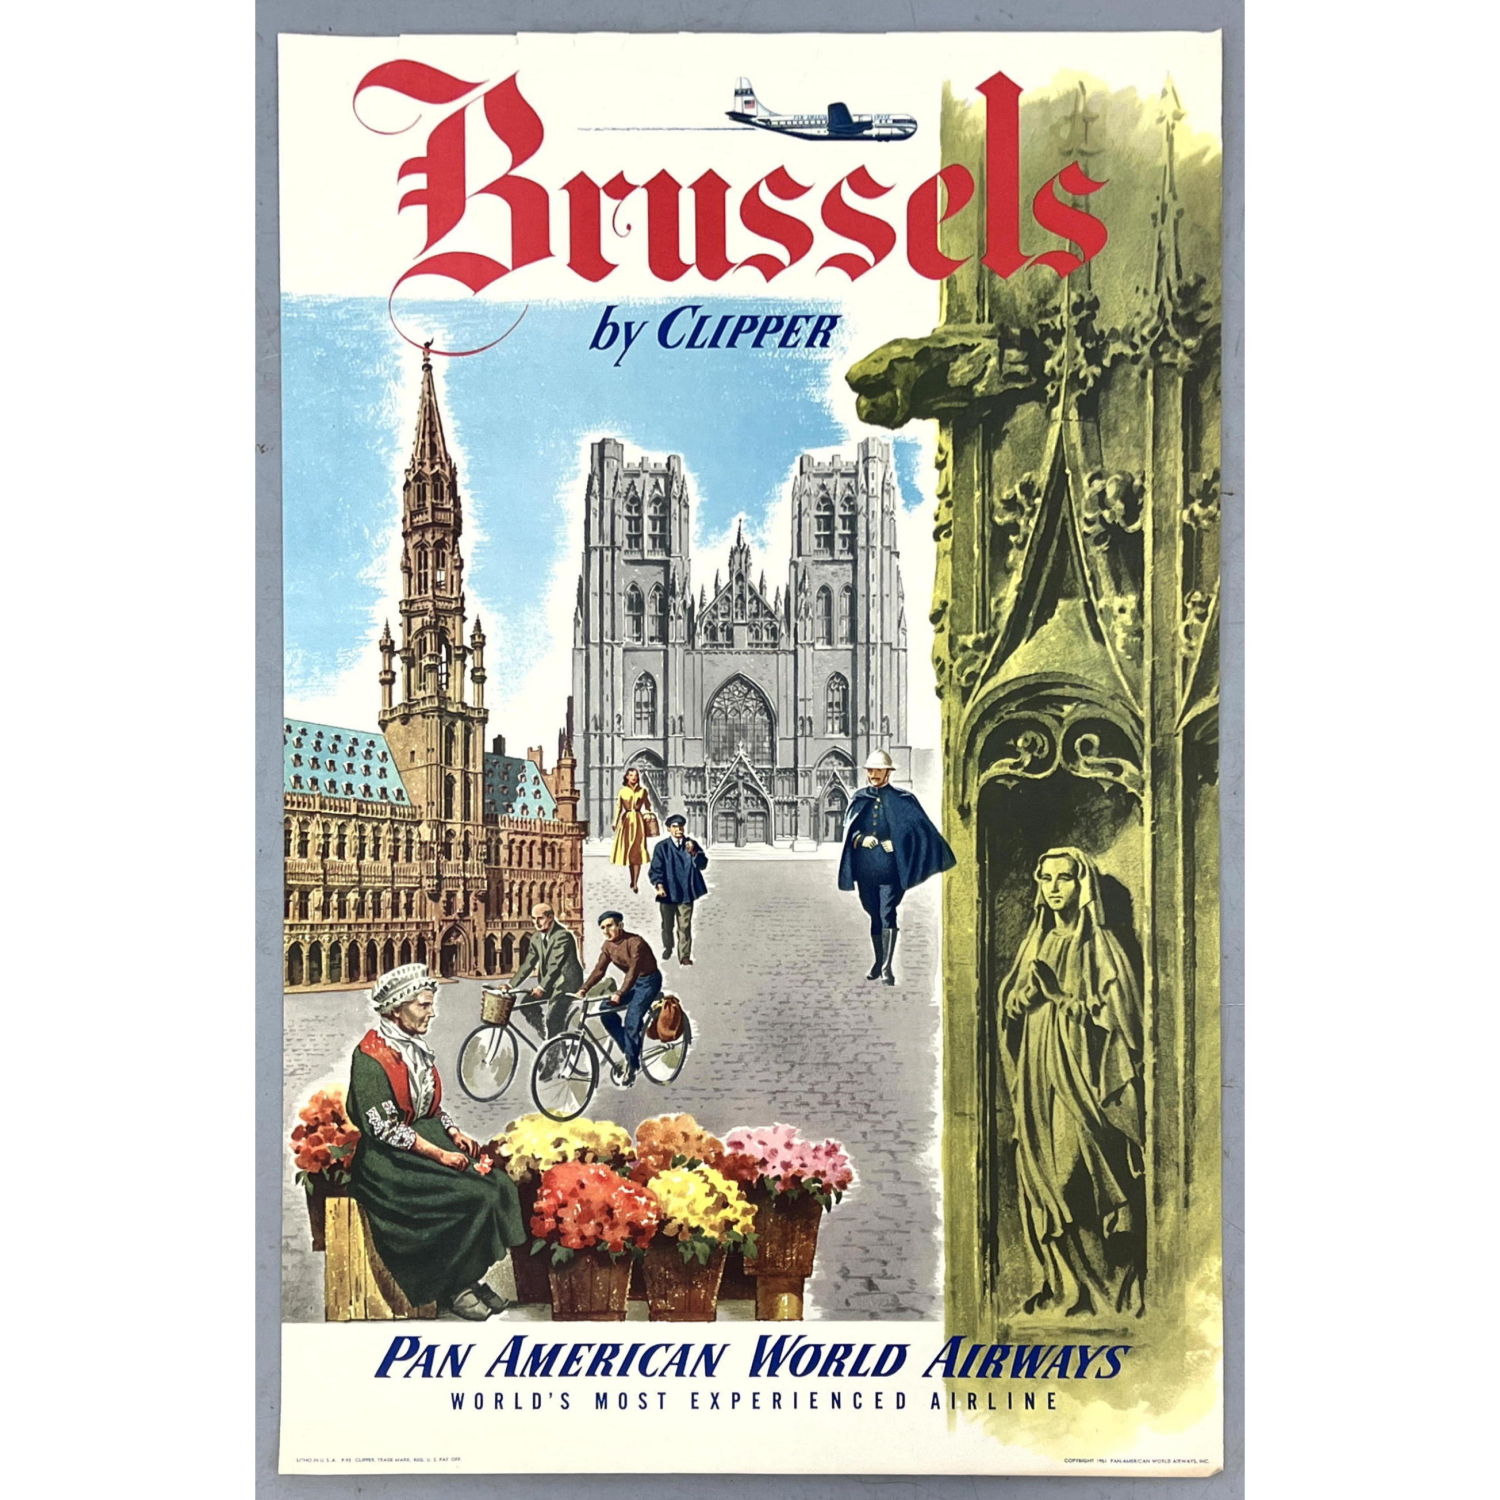 PAN AM to BRUSSELS Travel Advertising